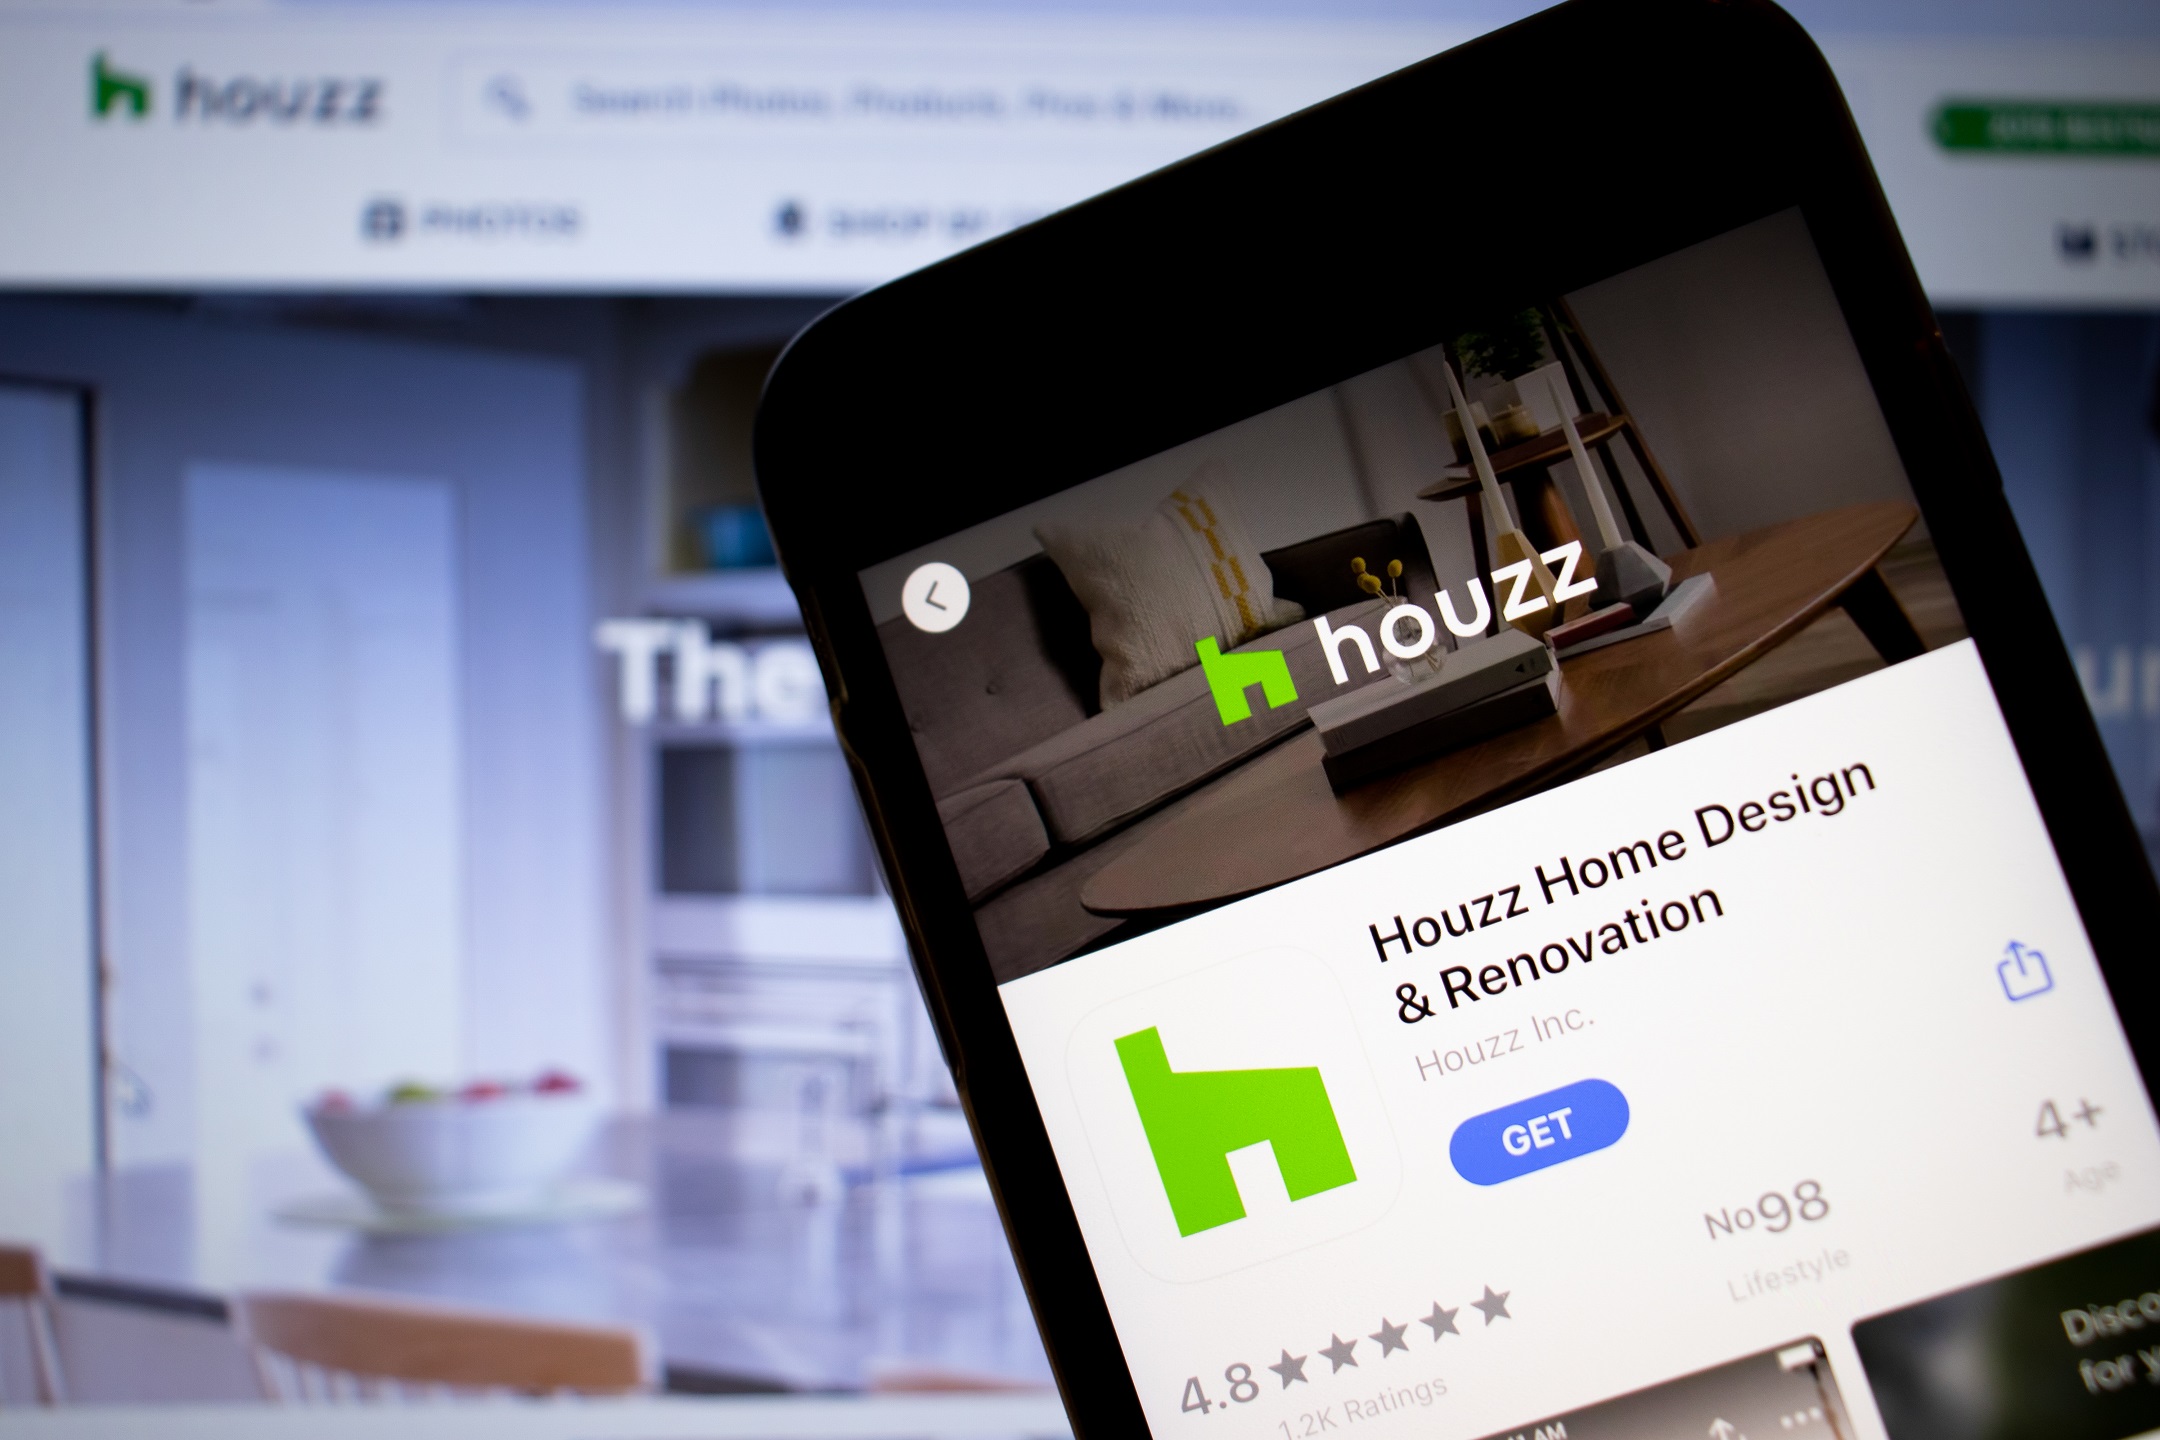 Houzz Application Opened on a Smartphone Display